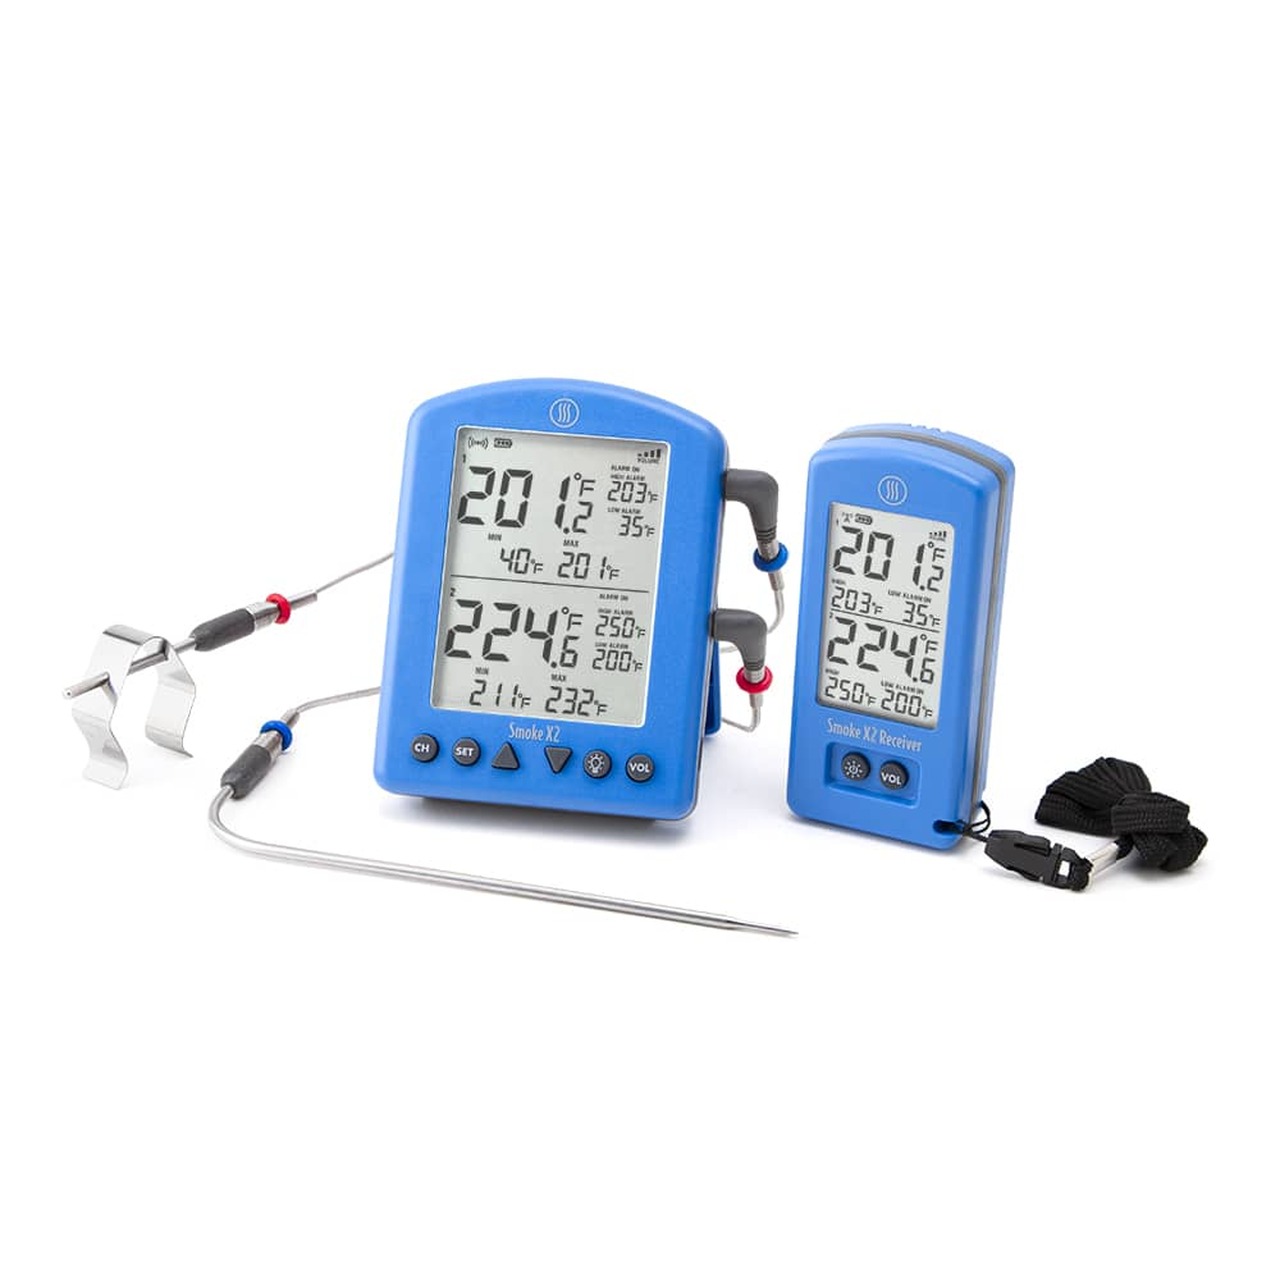 Hygrometer and Thermometer by ThermoWorks